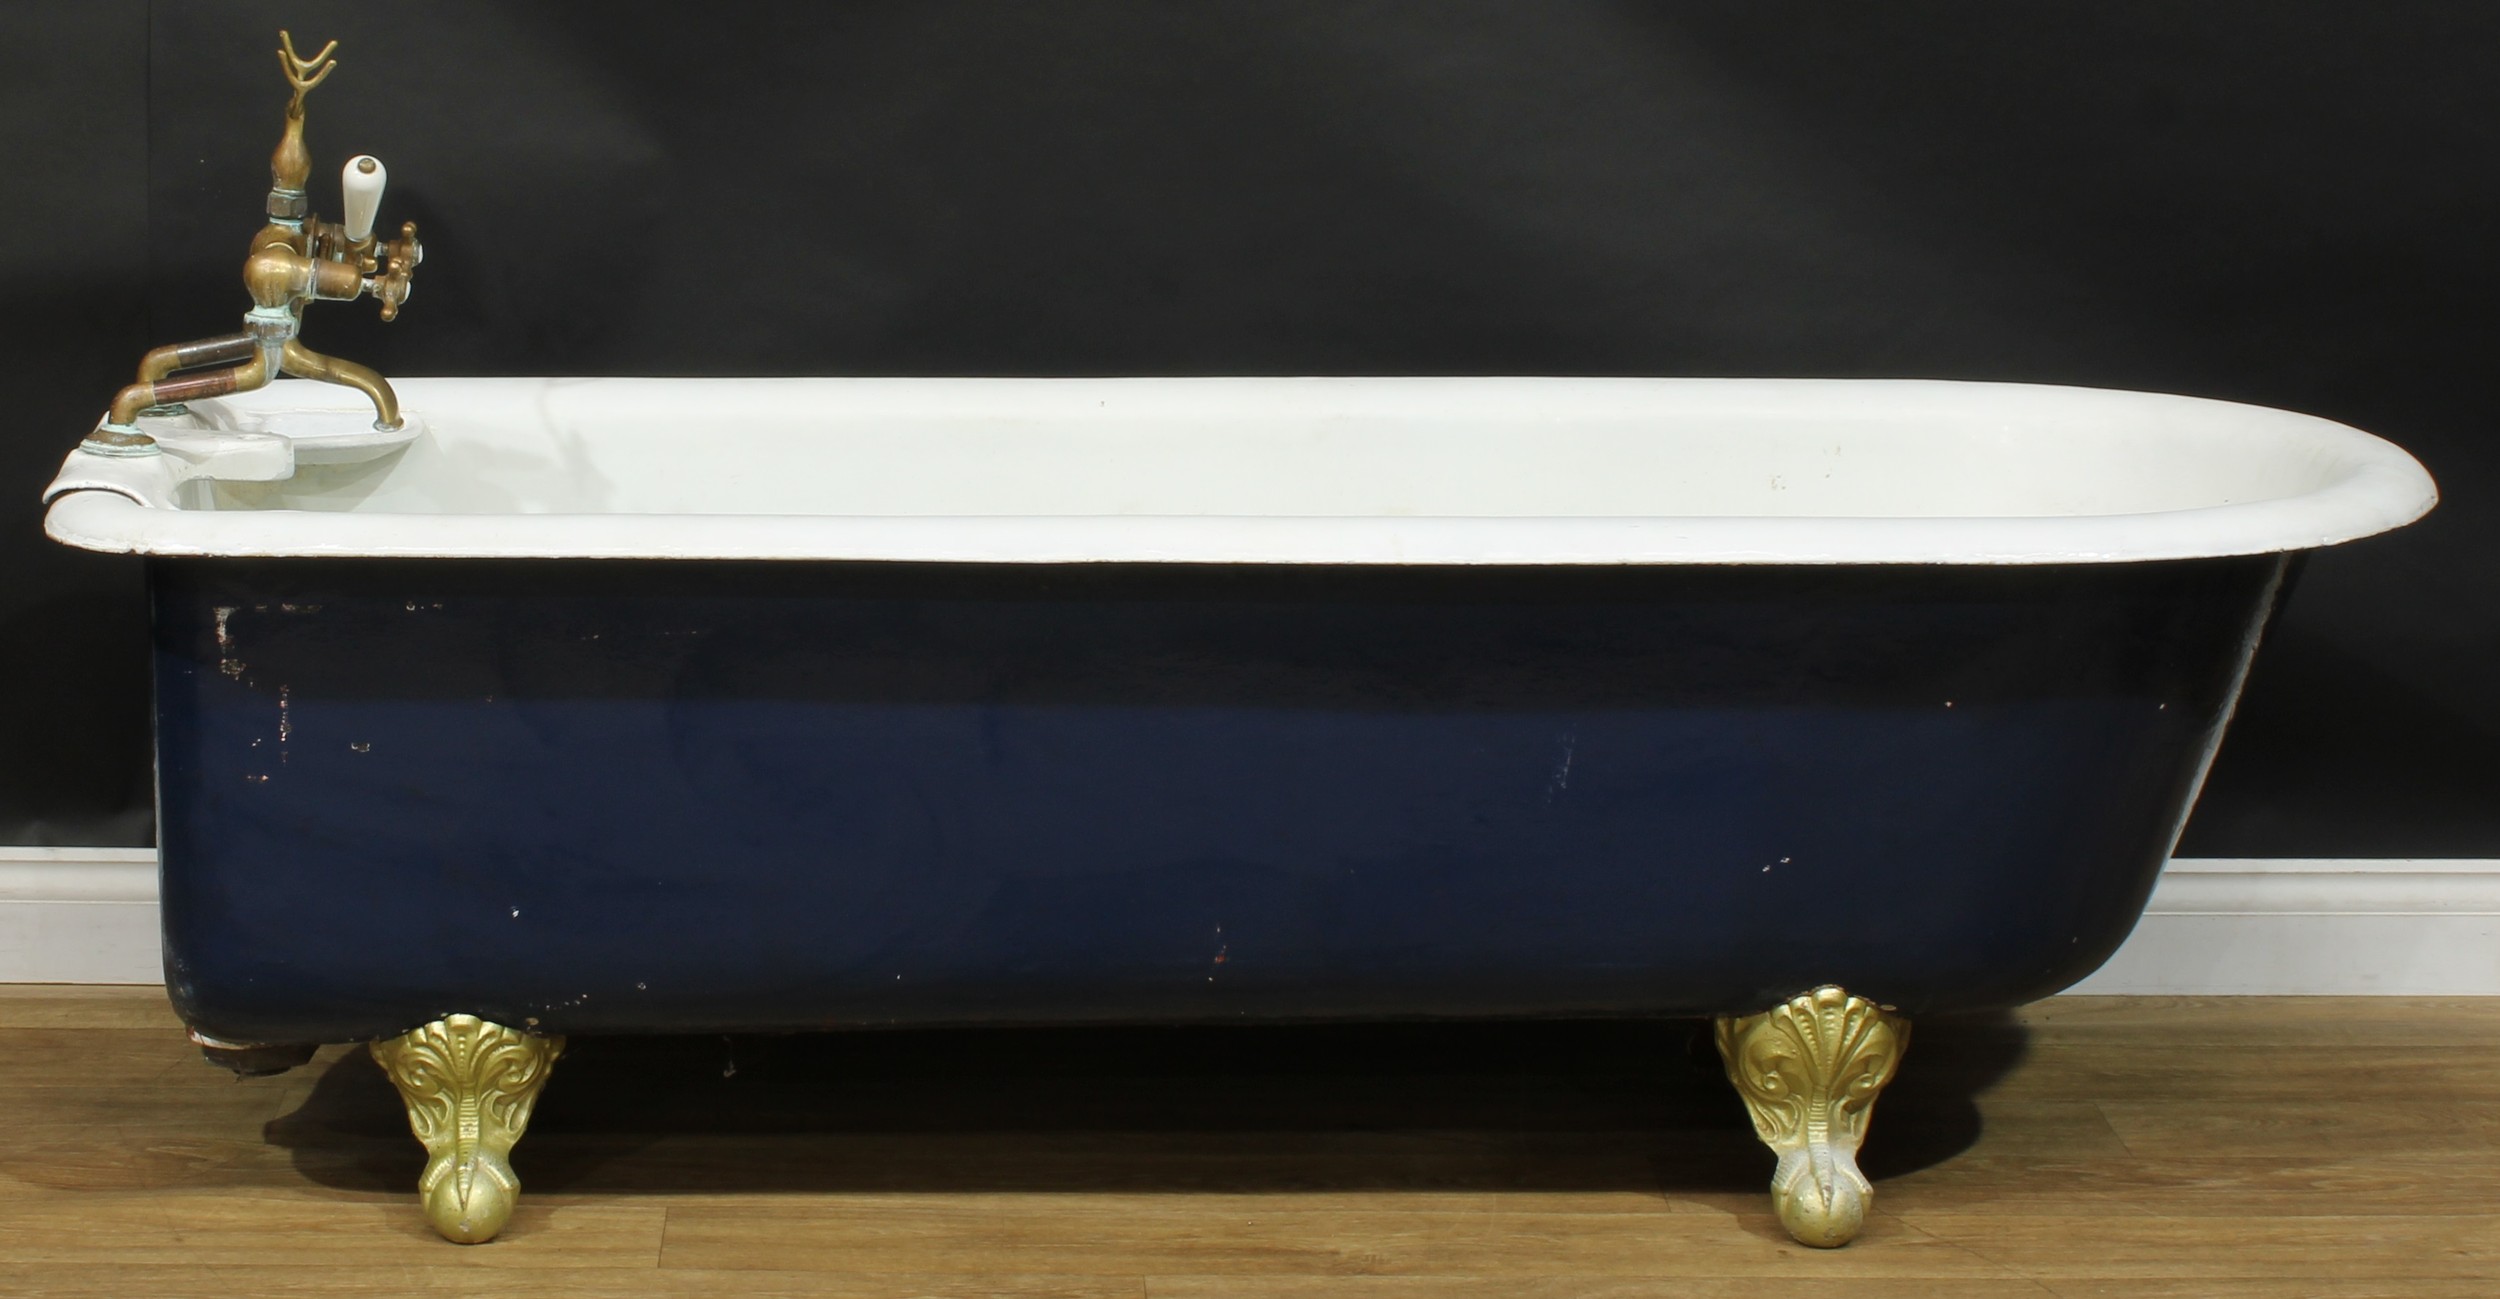 An early to mid-20th century cast iron roll top bath, ball and claw feet, 58cm high excluding - Image 2 of 2